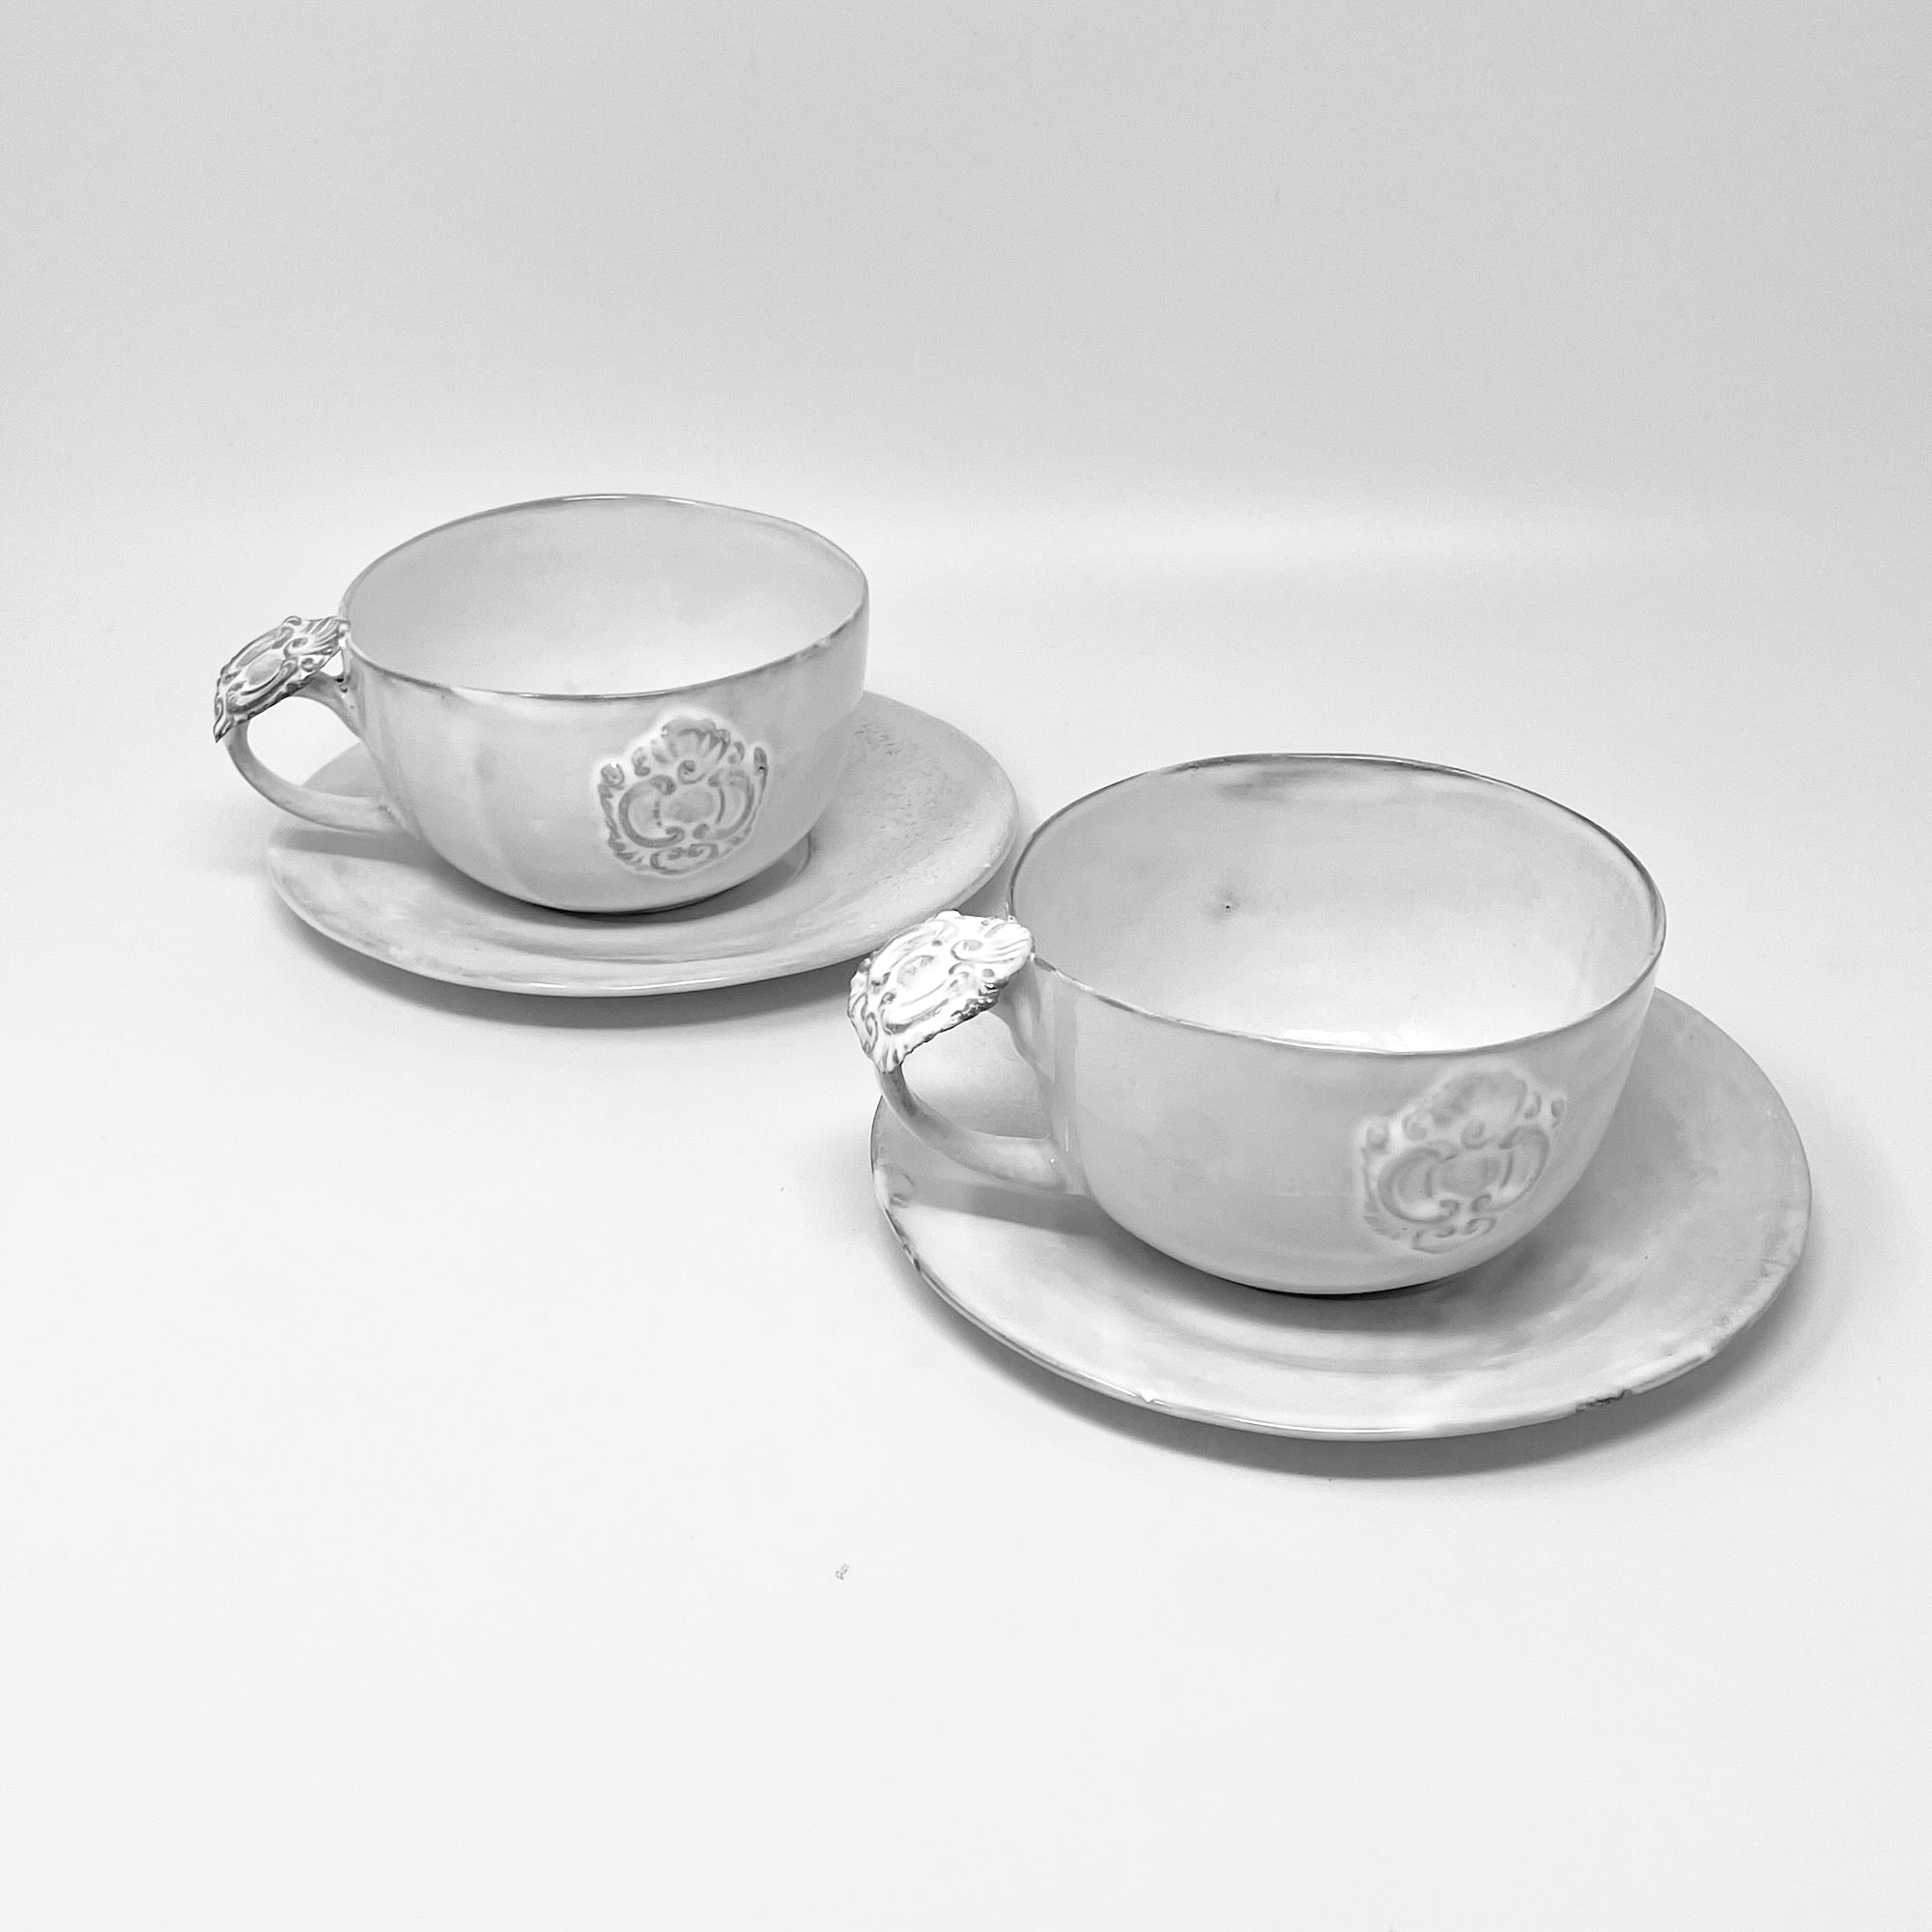 2x Chocolate Cups and saucers